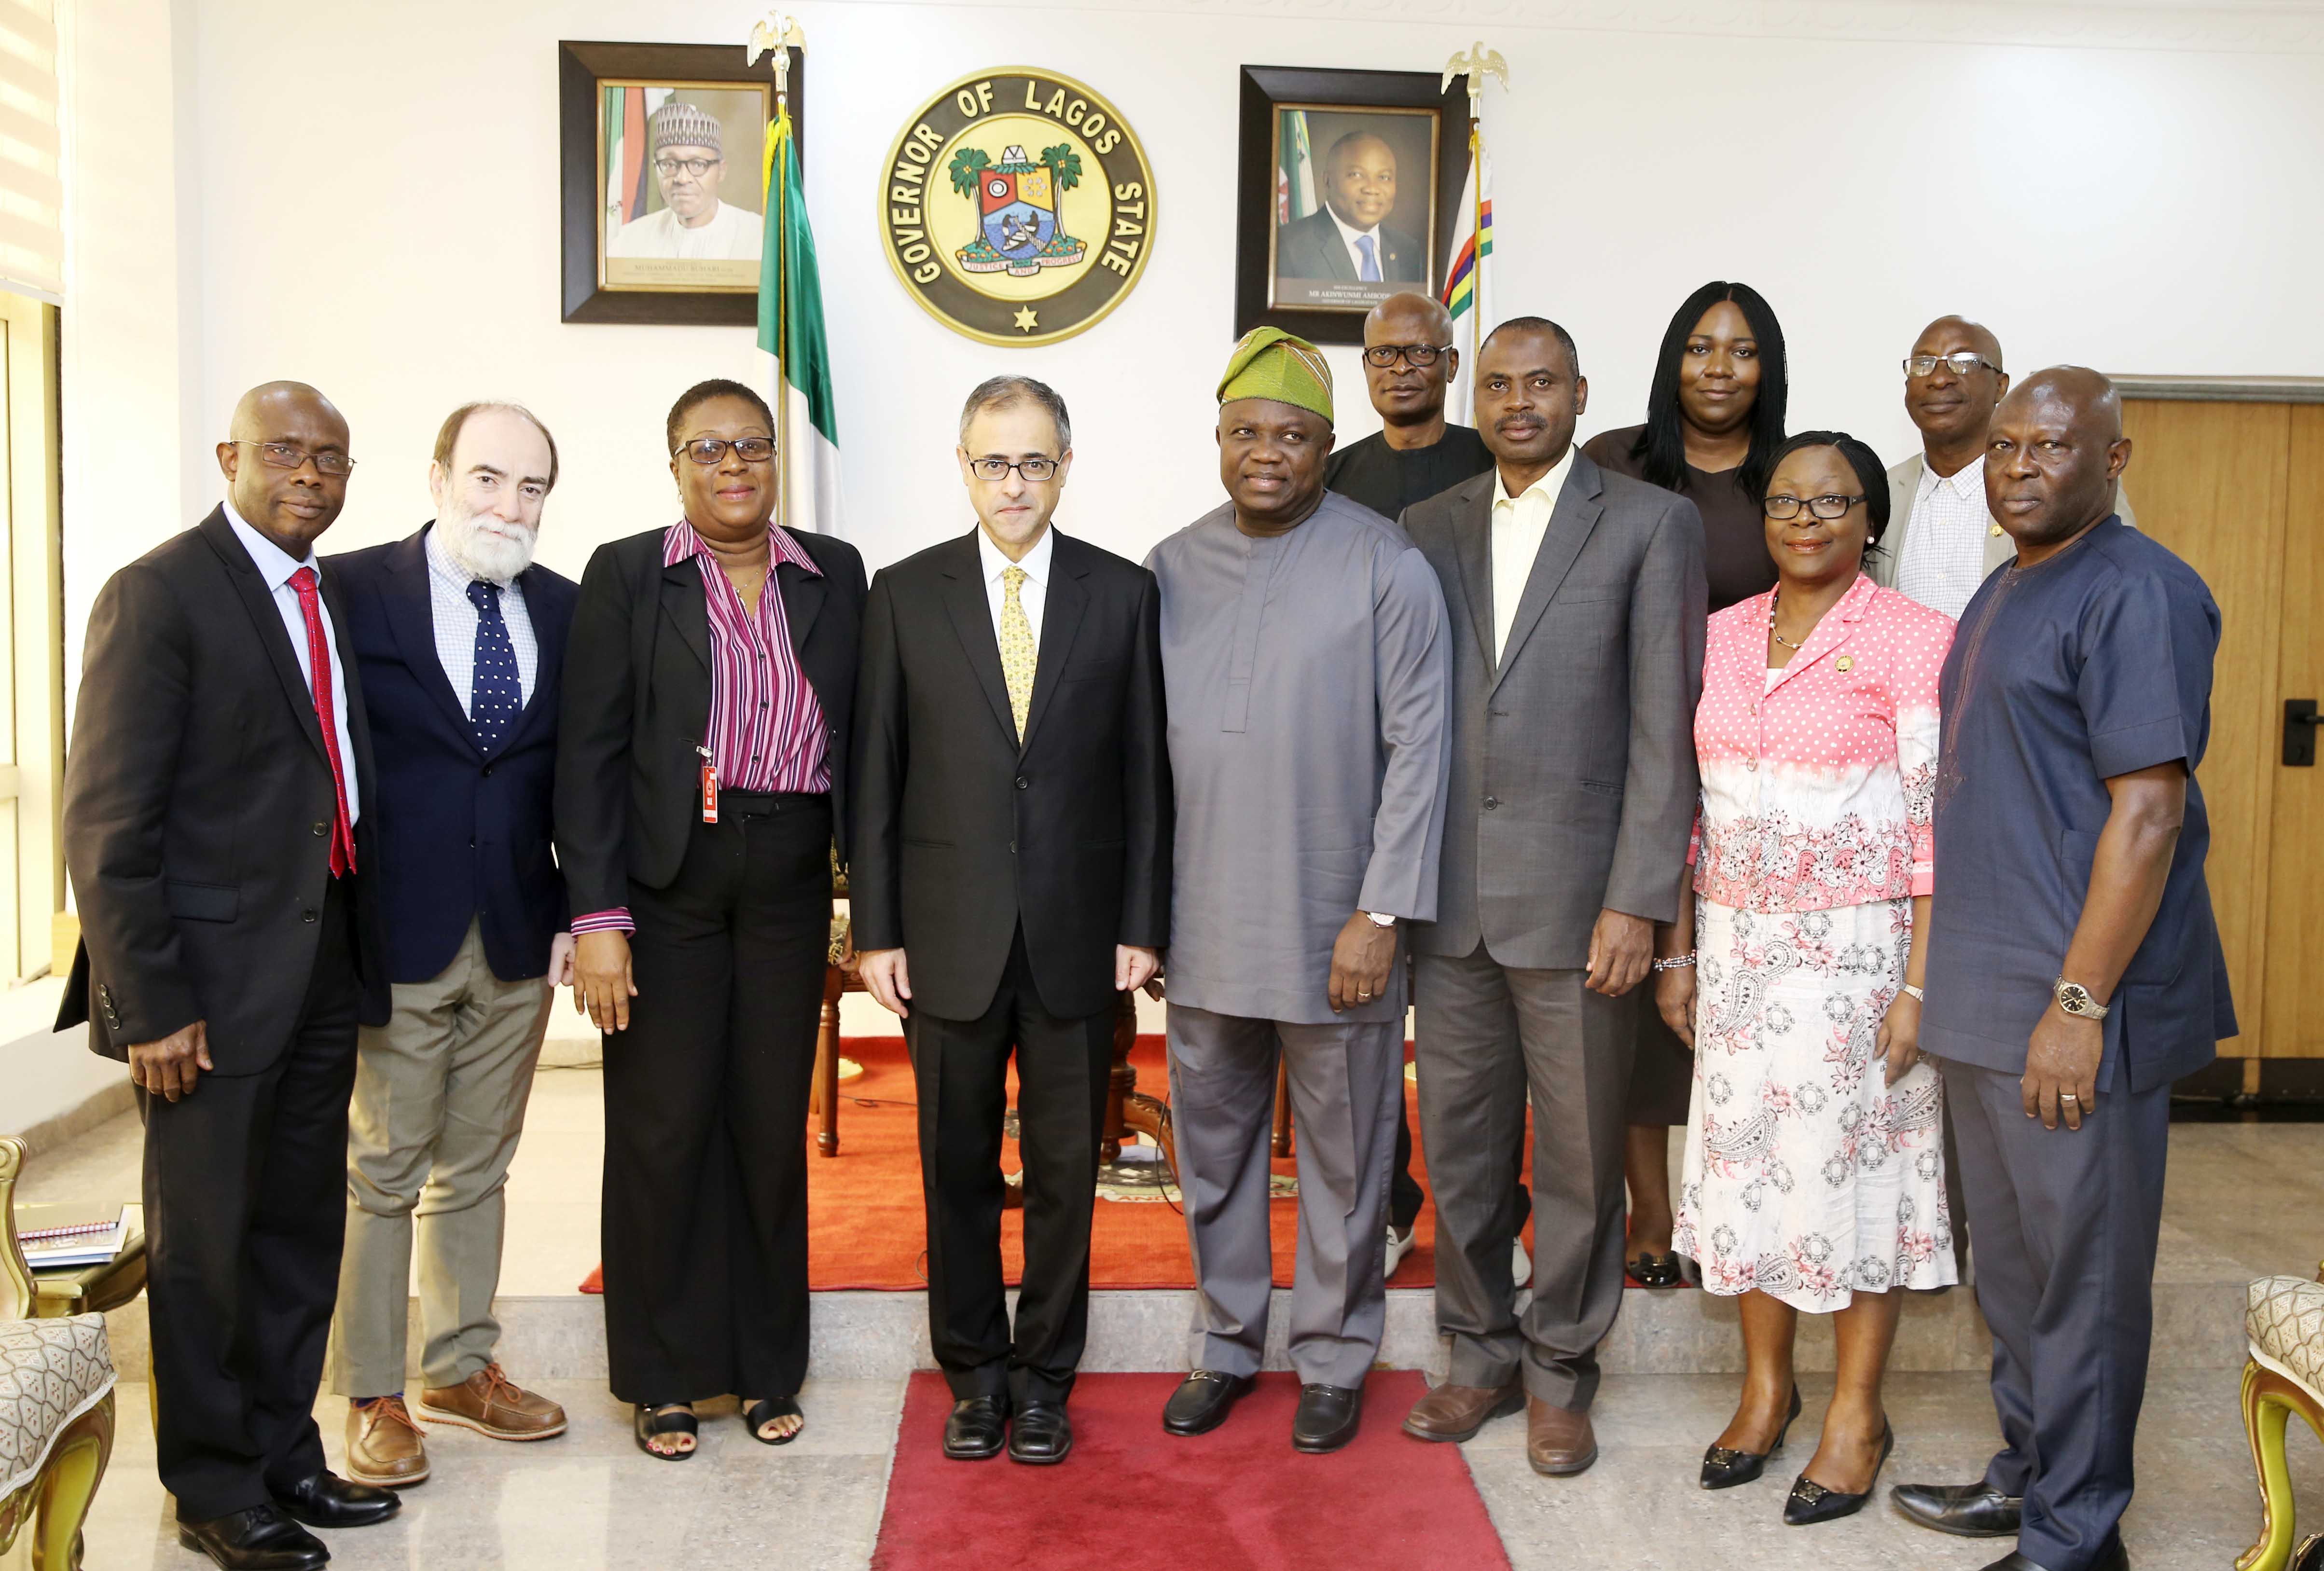 Lagos State Governor, Mr. Akinwunmi Ambode (middle); Country Director, World Bank, Mr. Rachid Benmessaoud (3rd left); Senior Operations Specialist, World Bank, Mrs. Ngozi Udolisa (2nd left); Lead Urban Specialist, South Africa, Dr. Sateh El-Arnaout (left); Commissioner for Water Infrastructure Development, Engr. Ade Akinsanya (right); Head of Service, Mrs. Olabowale Ademola (2nd right); Senior Transport Specialist, World Bank, Engr. Tunji Ahmed (3rd right) and Special Adviser to the Governor on Audit & Finance, Mr. Adeniyi Popoola (right behind) during the courtesy visit to the Governor at the Lagos House, Ikeja, on Thursday, July 13, 2017.